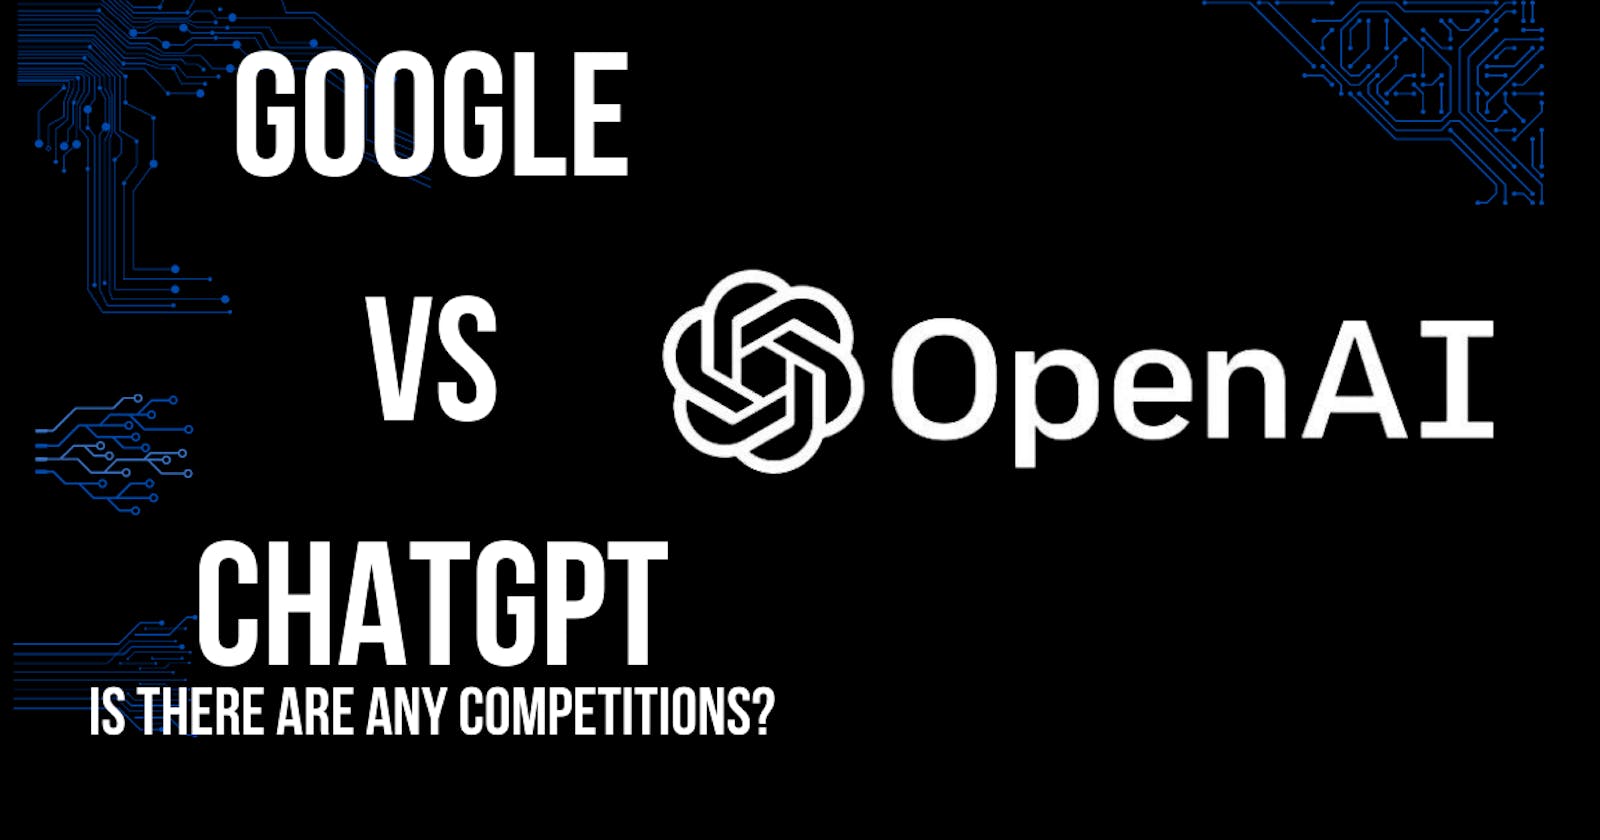 Google vs. ChatGPT: Comparing a Search Engine and a Chatbot